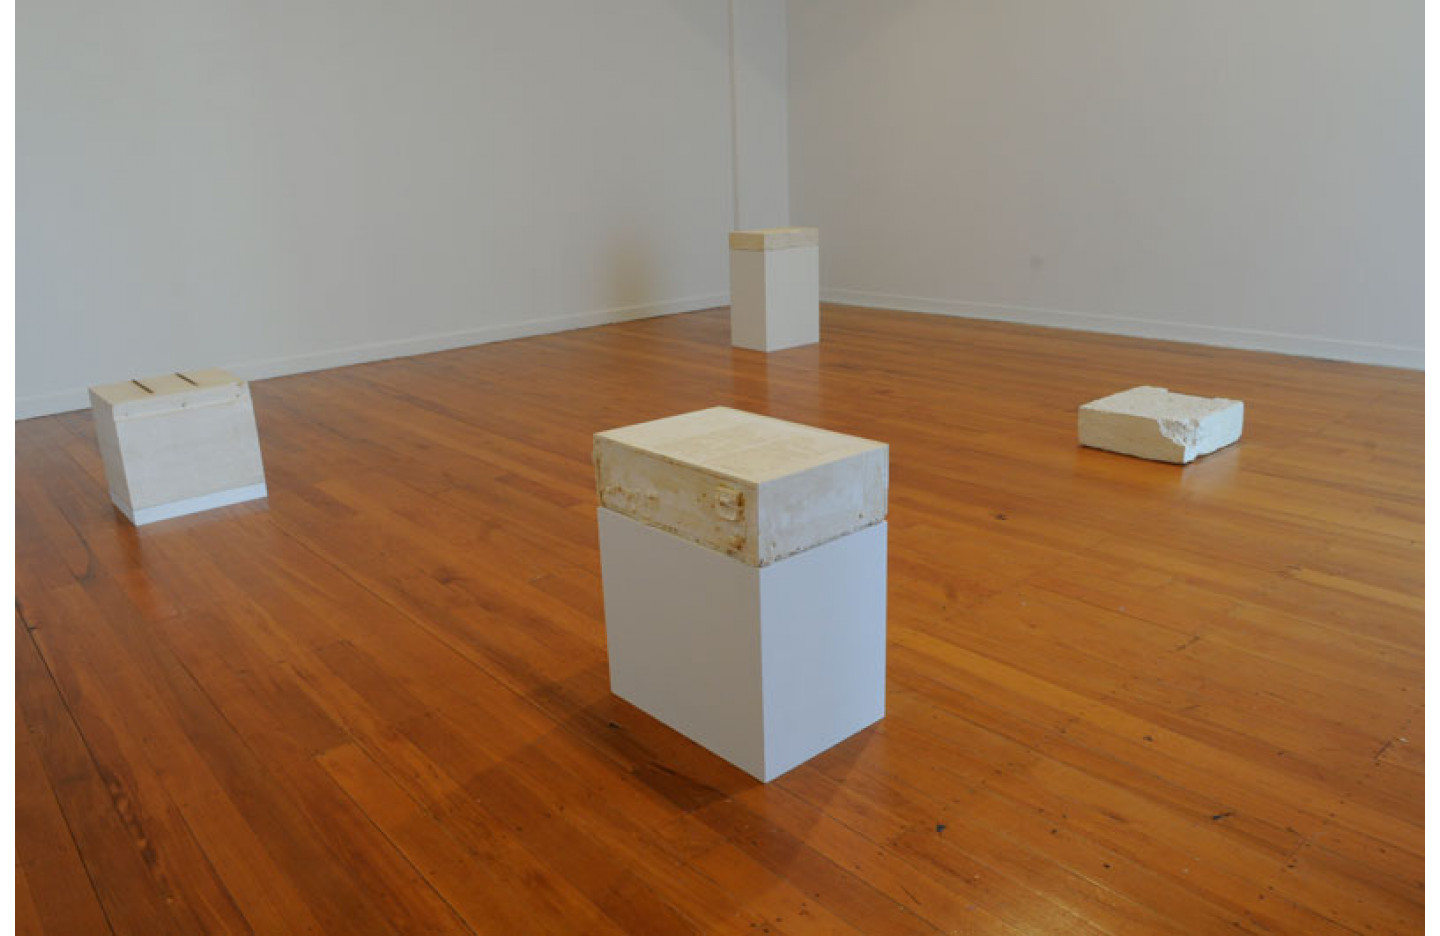 Installation image of "Forms of Drawing", Ramp Gallery Feb 2014. Tim Middleton